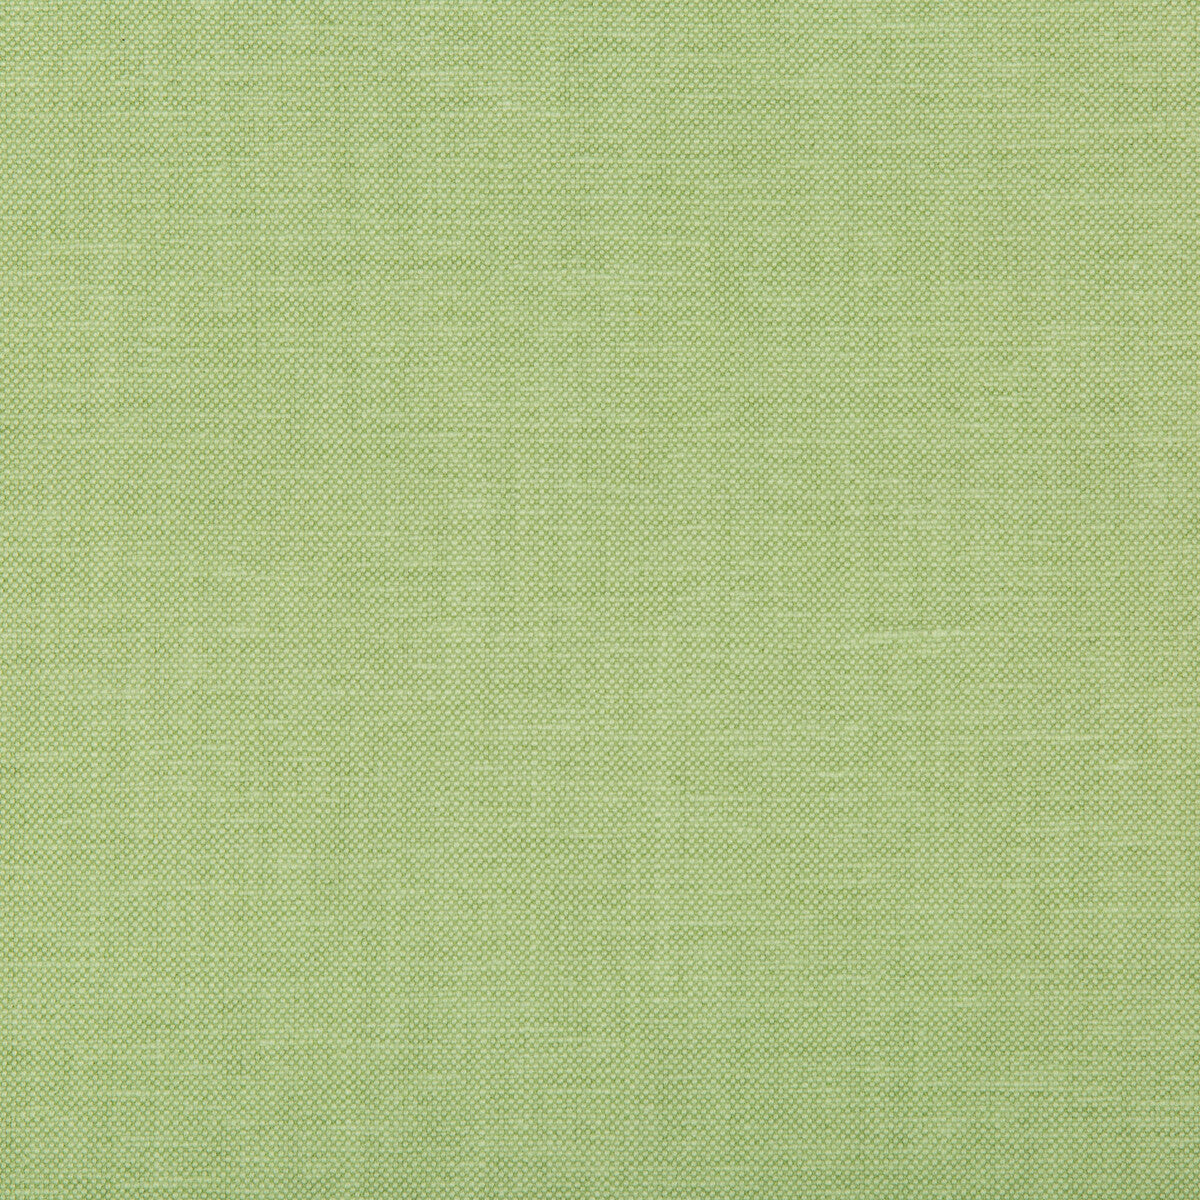 Oxfordian fabric in leaf color - pattern 35543.13.0 - by Kravet Basics in the Bermuda collection